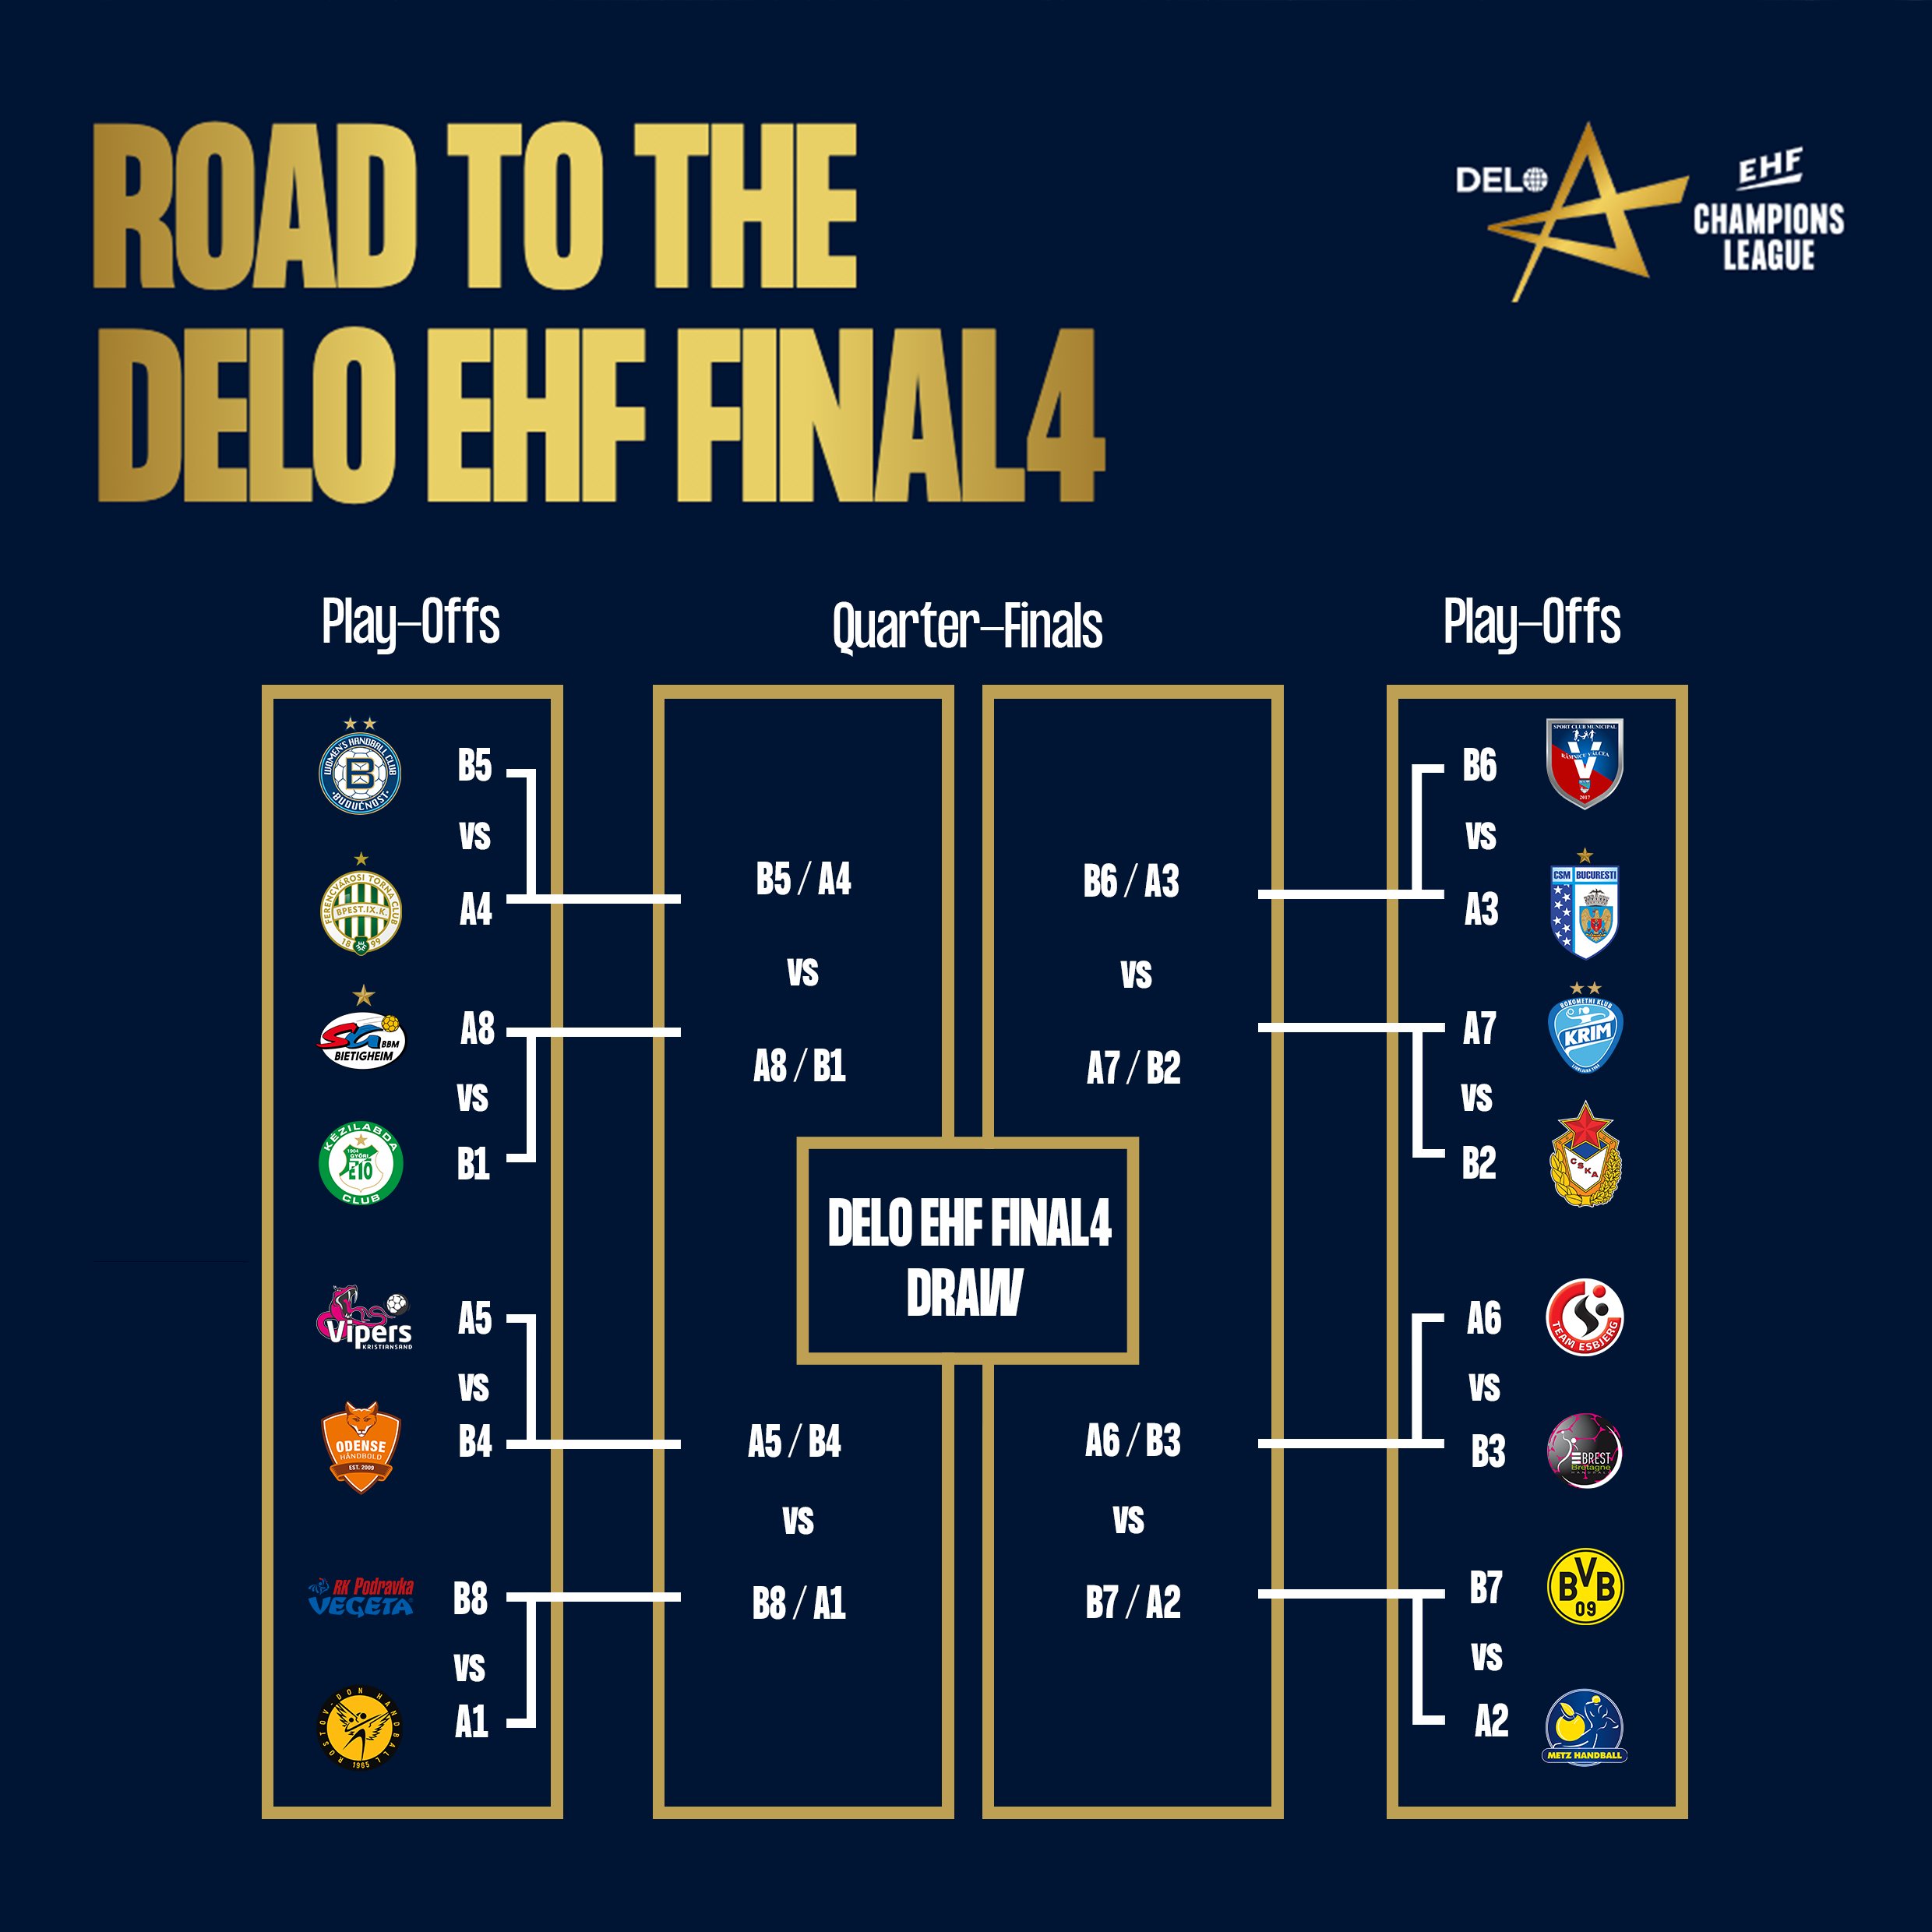 EHF Champions League on Twitter: "The road to the @Delo #ehffinal4 brings on very exciting matches 🤩 Which teams it to the Quarter-finals? 👇 ➡️ First leg: 6/7 March 2021